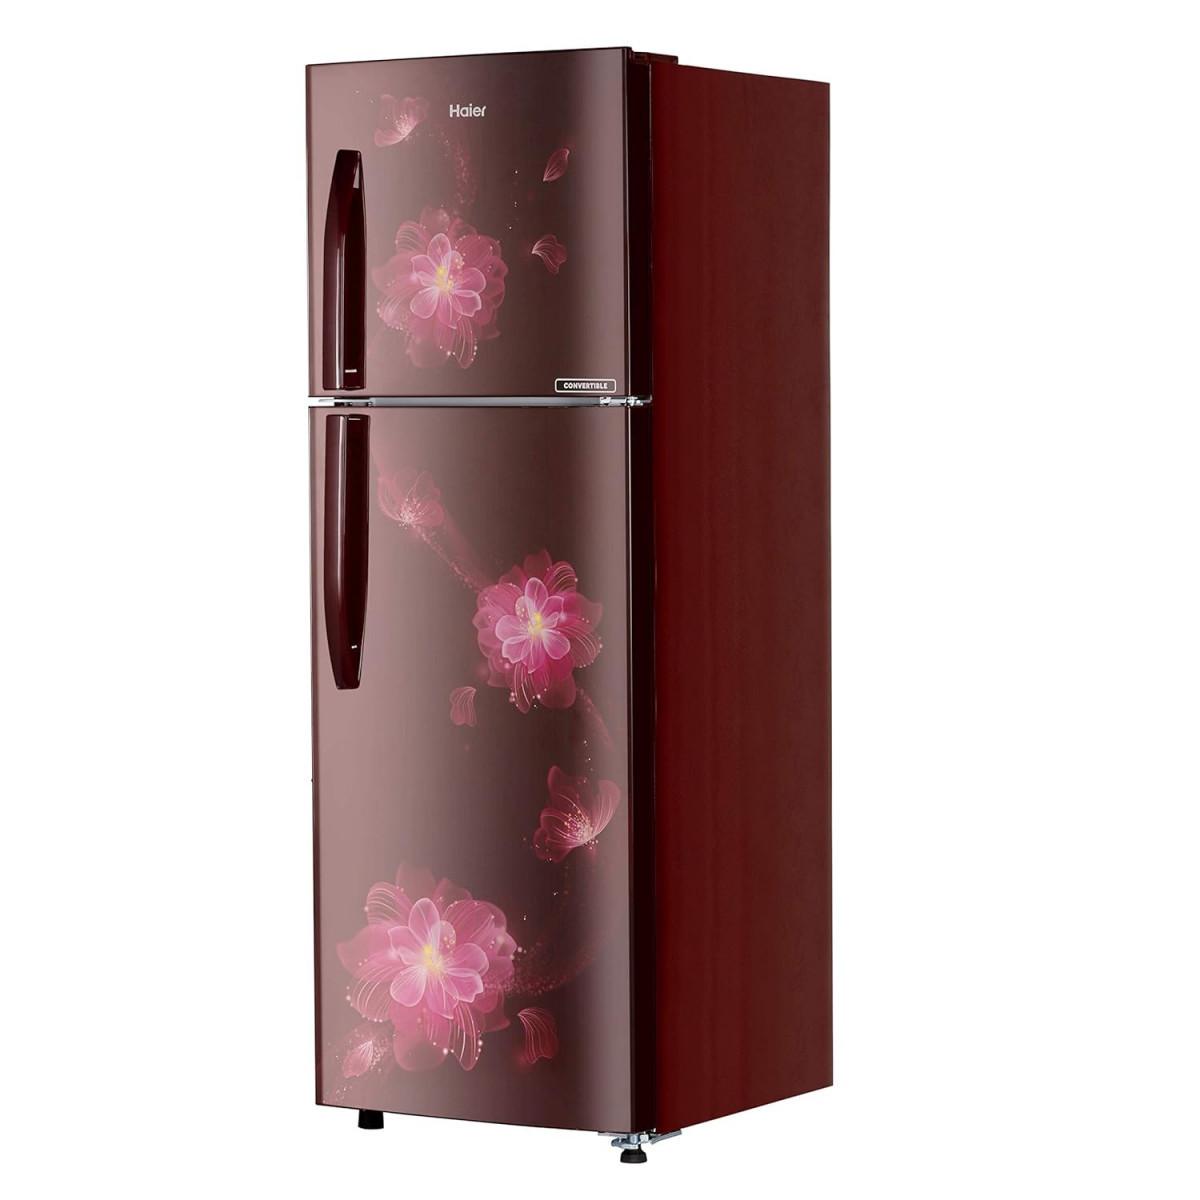 Haier 258 L 2 Star Frost Free Double Door Convertible Refrigerator Appliance HEF-25TRFF Red Blossom 2022 Model